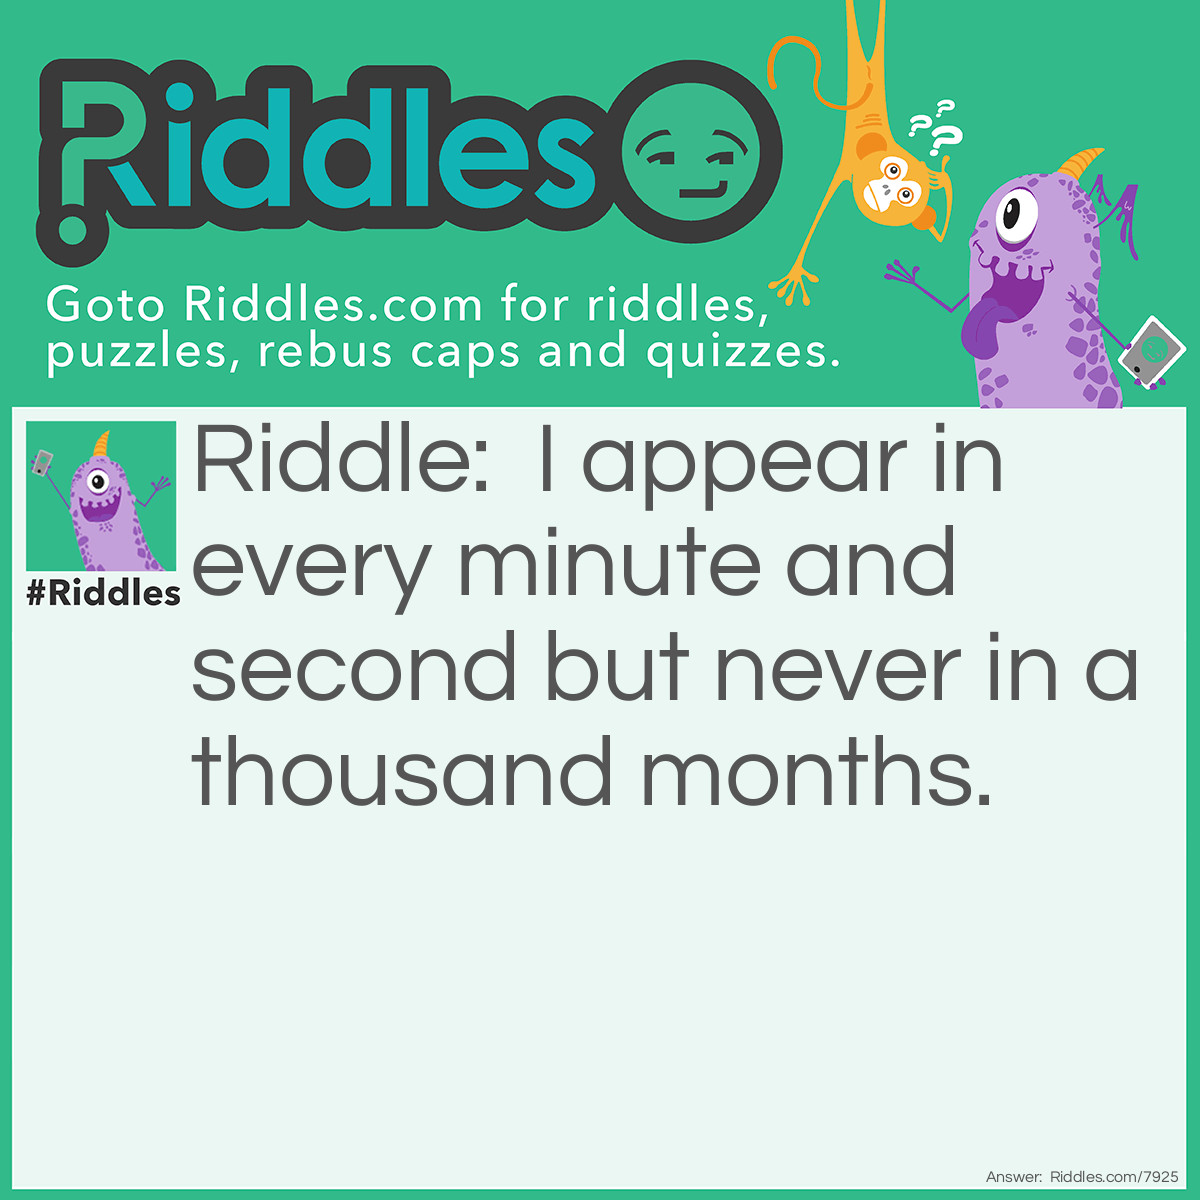 Riddle: I appear in every minute and second but never in a thousand months. Answer: The letter E.